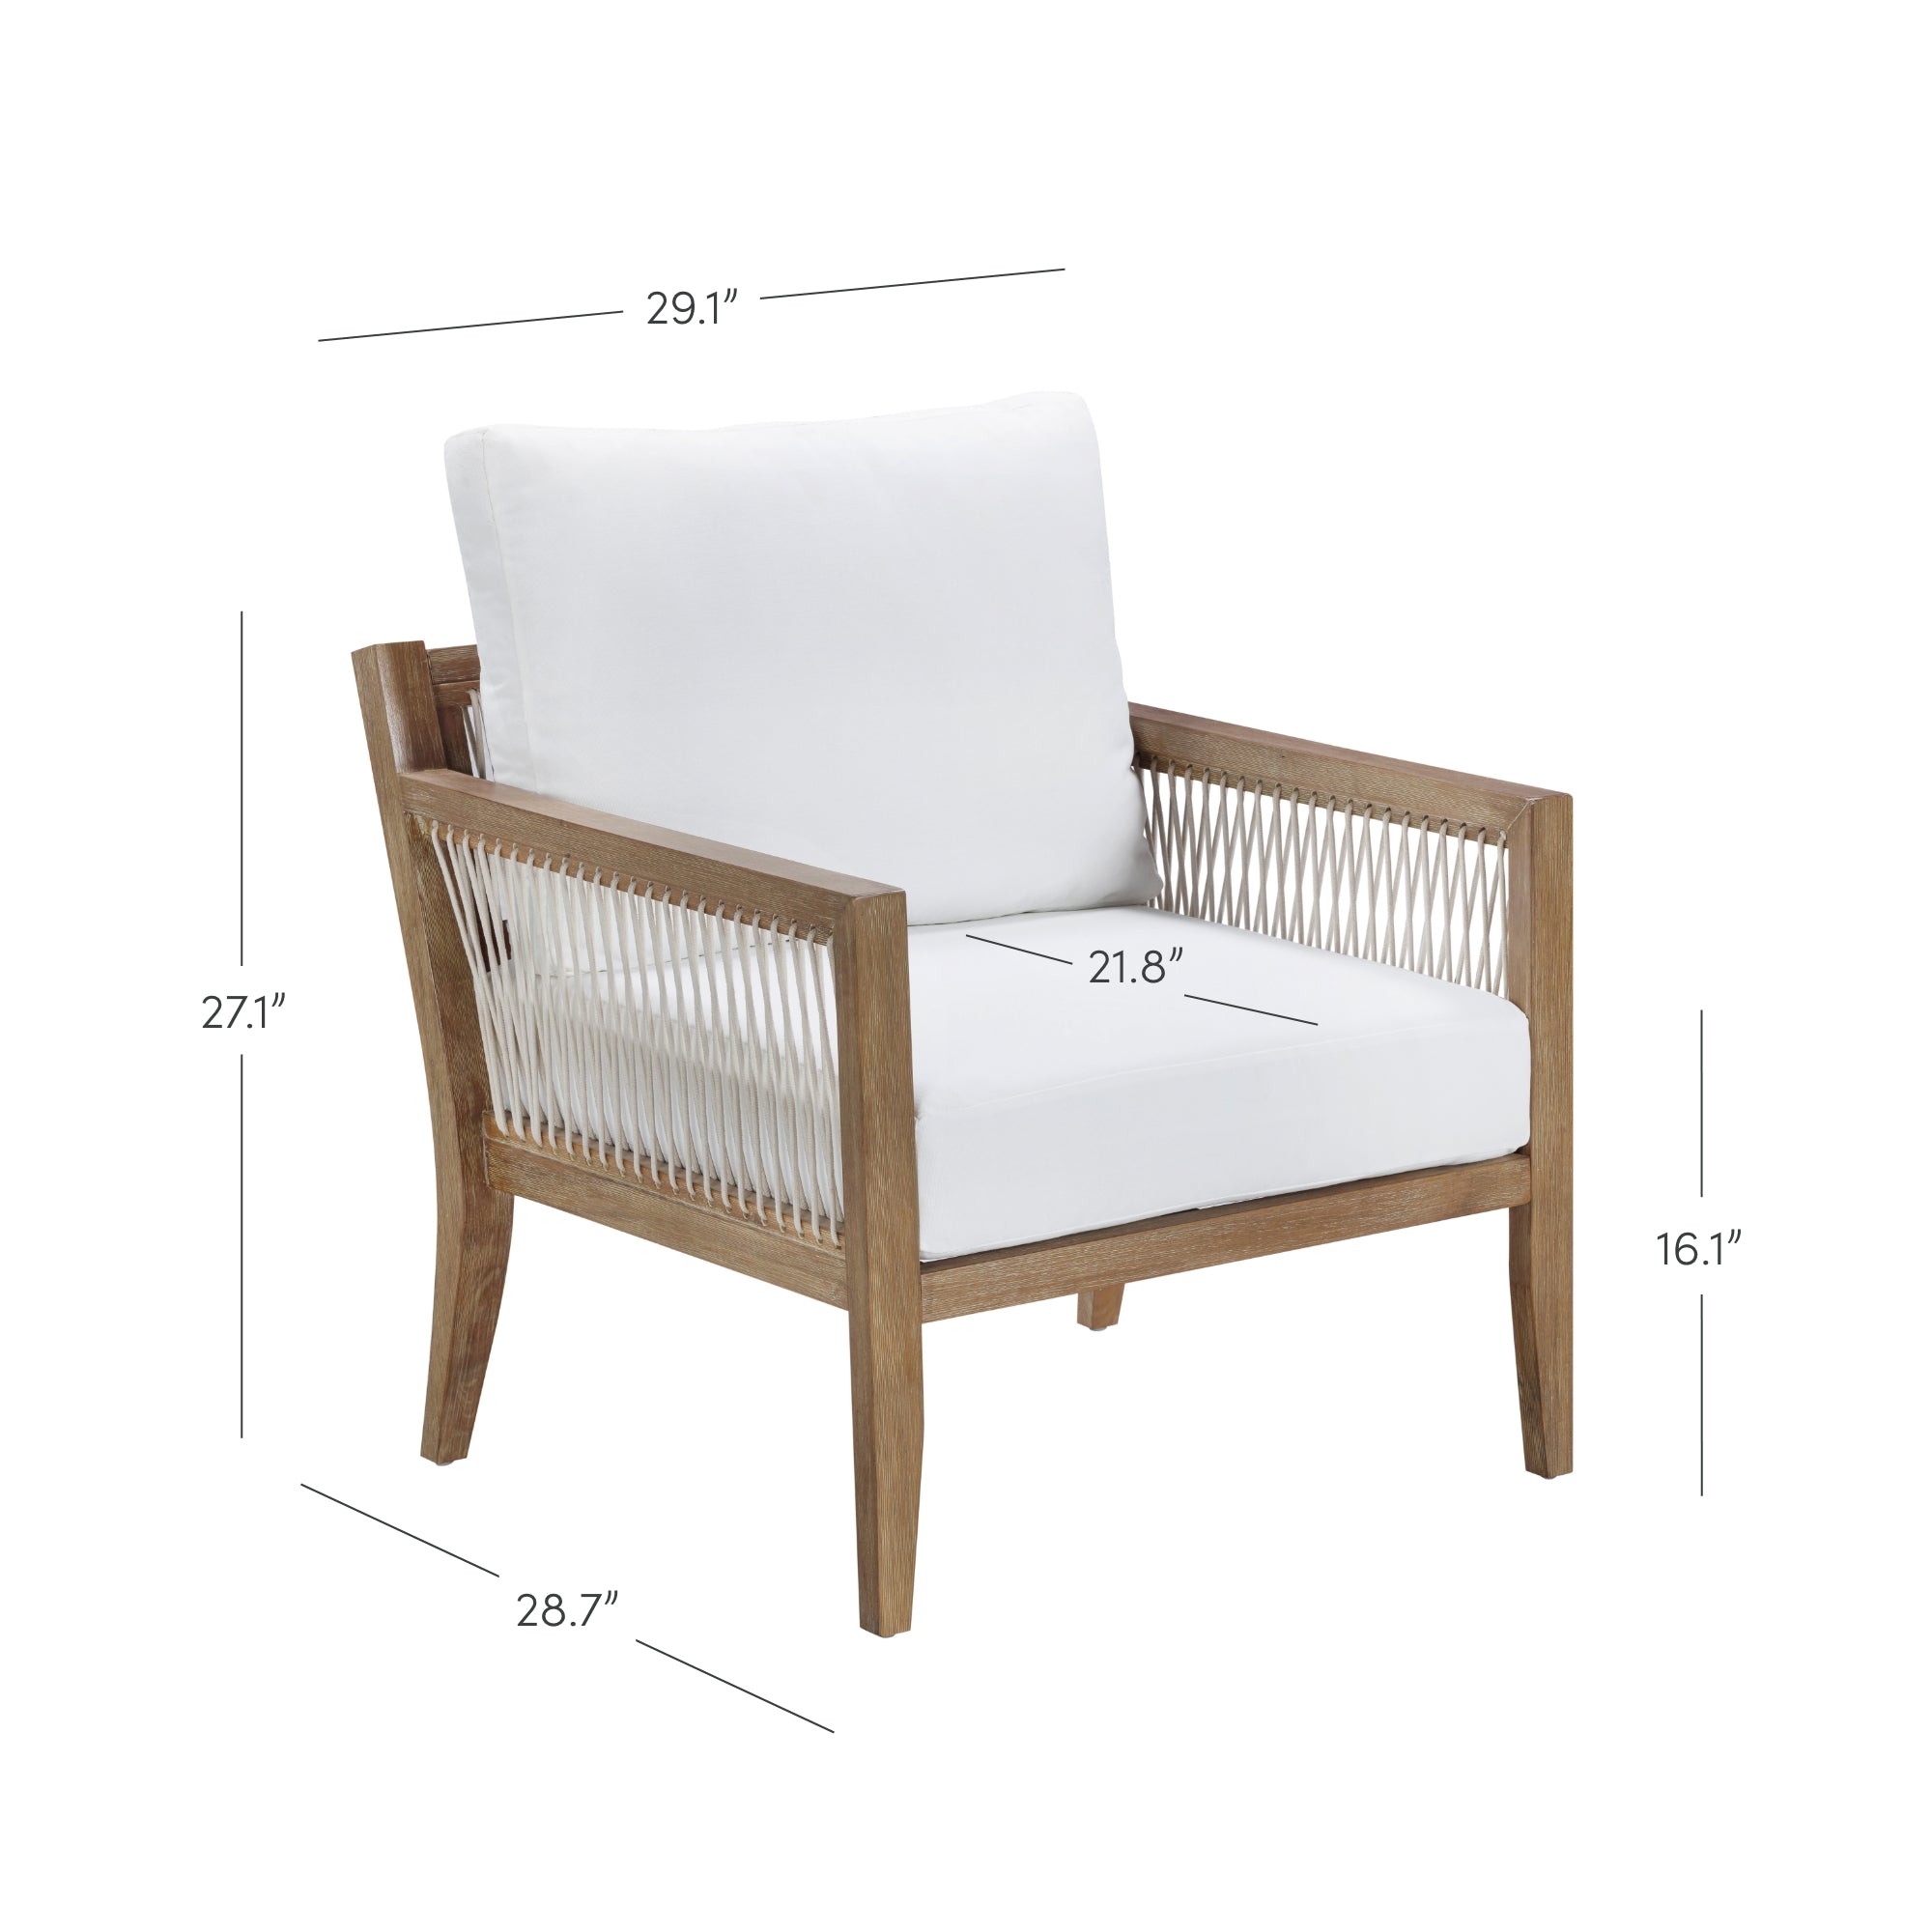 Set of 4 Outdoor Patio Arm Chairs White